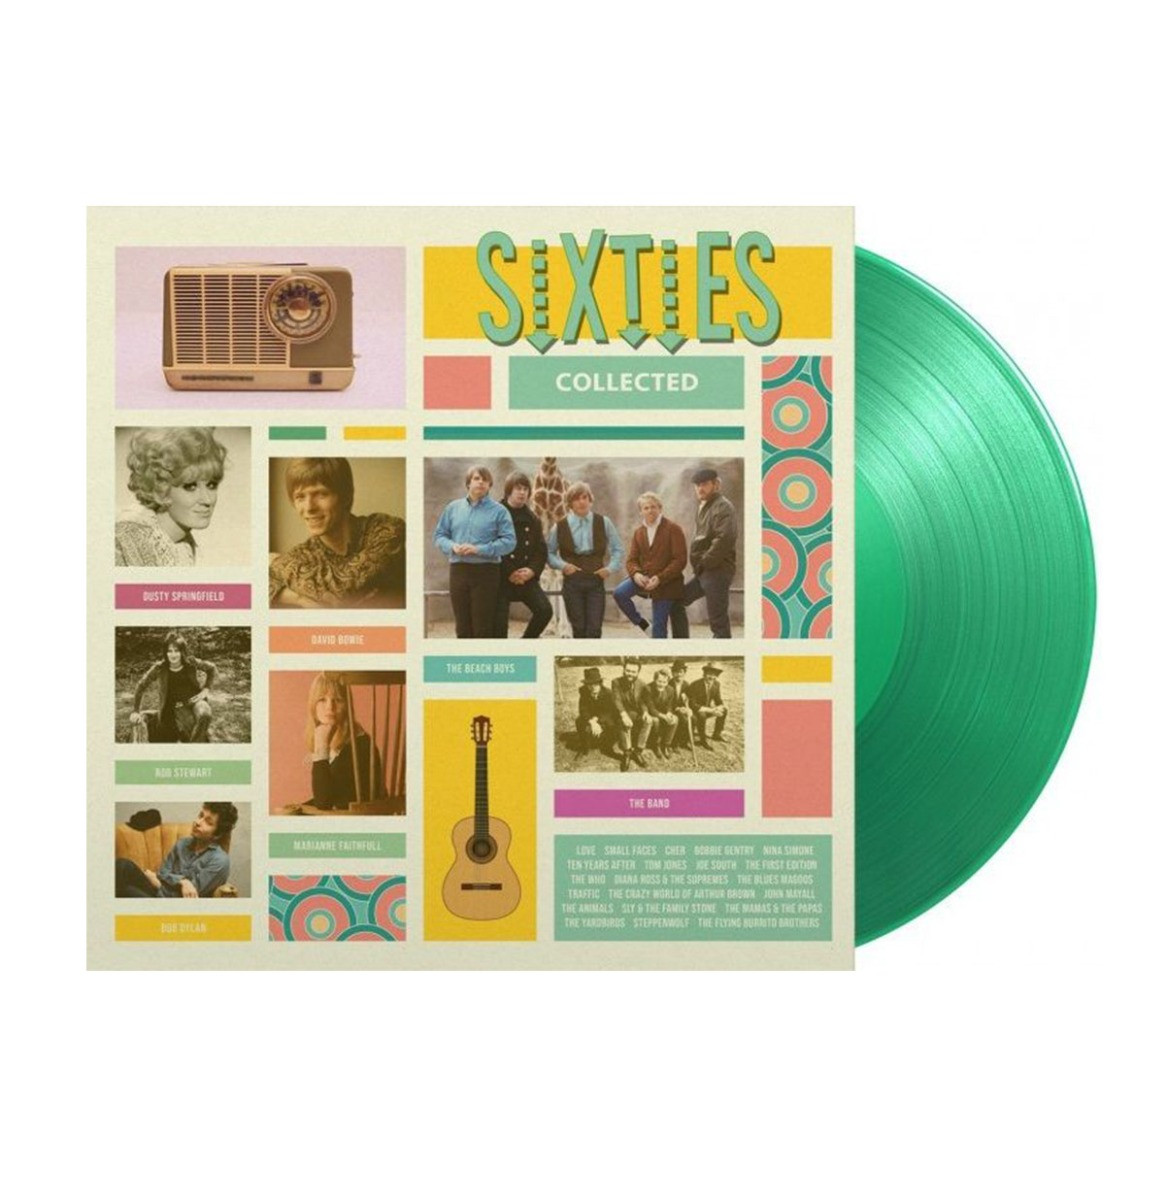 Sixties Collected Limited Edition Transparent Green Vinyl 2 LP